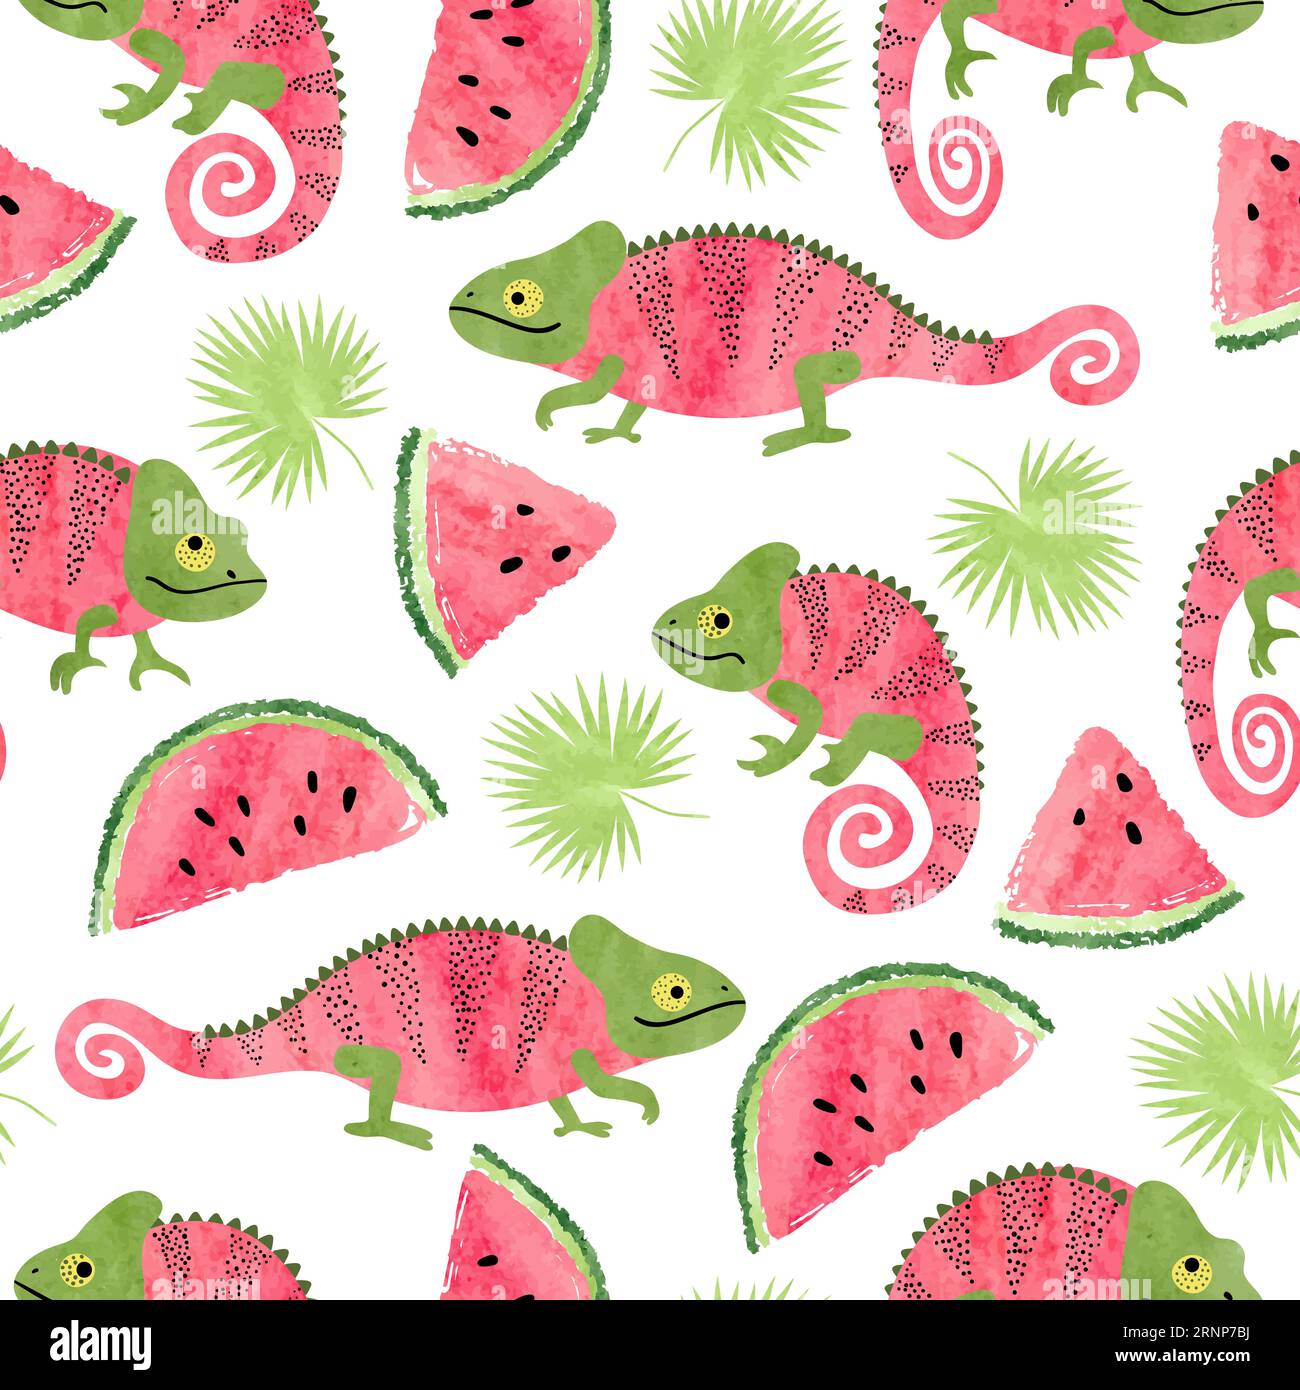 Seamless tropical pattern with cute watercolor chameleons, watermelons and palm leaves Stock Vector